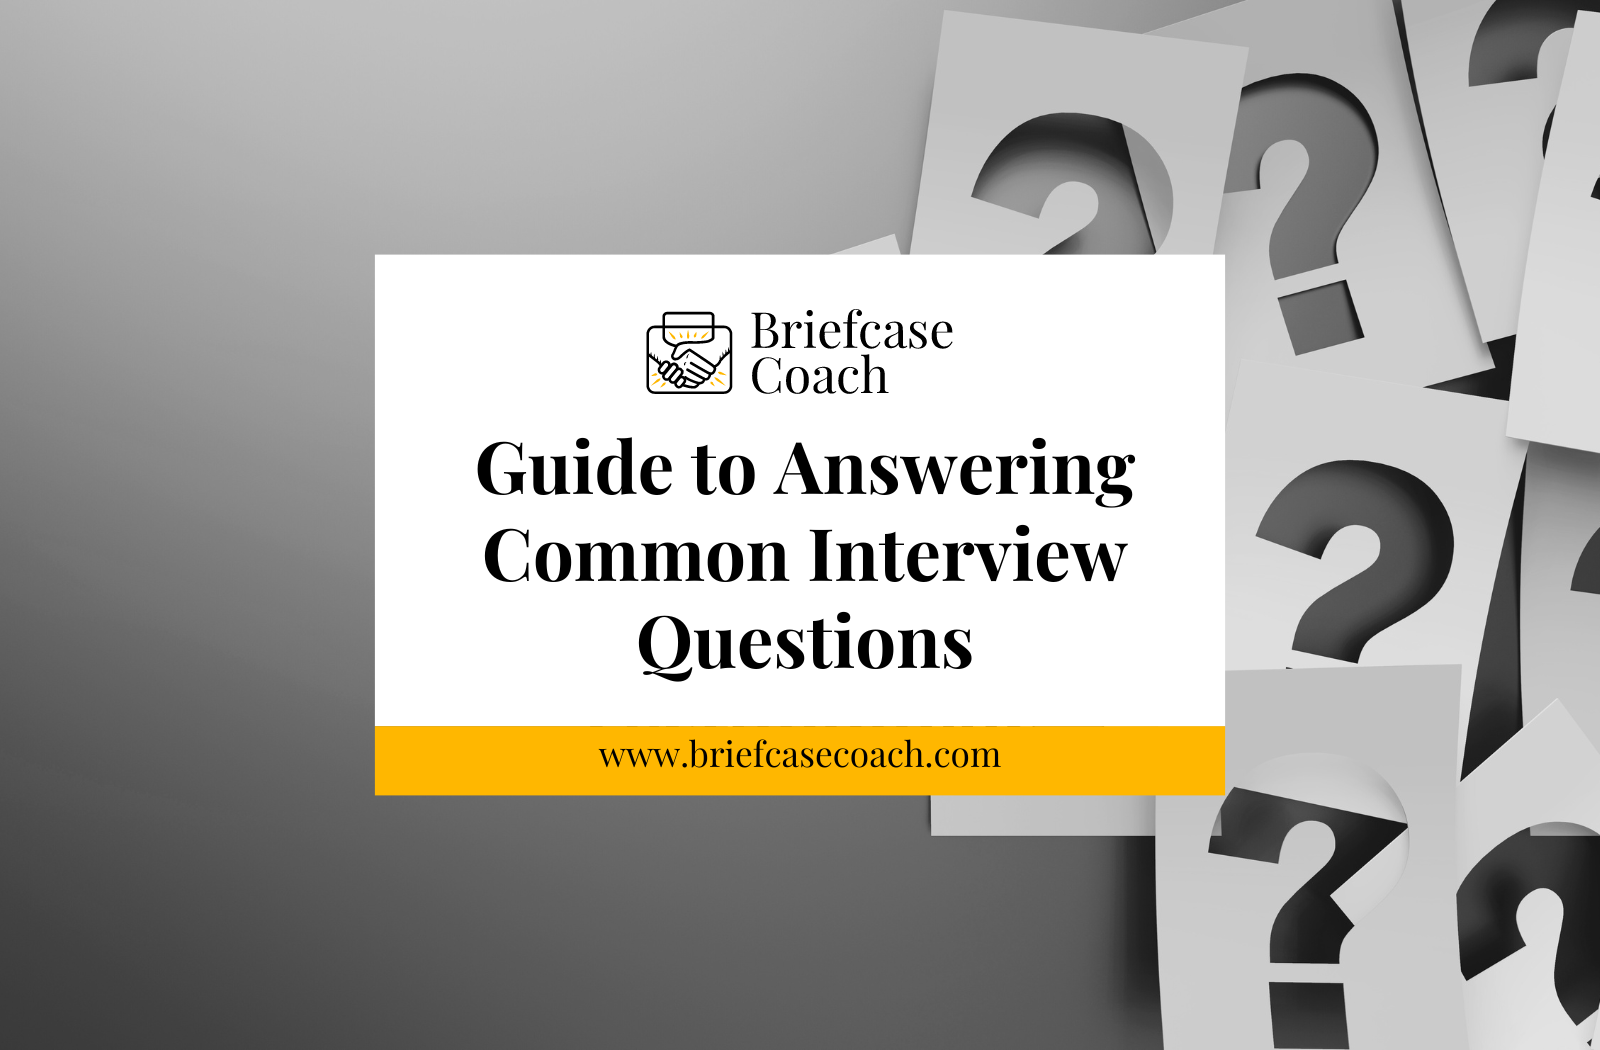 Guide to Answering Common Interview Questions